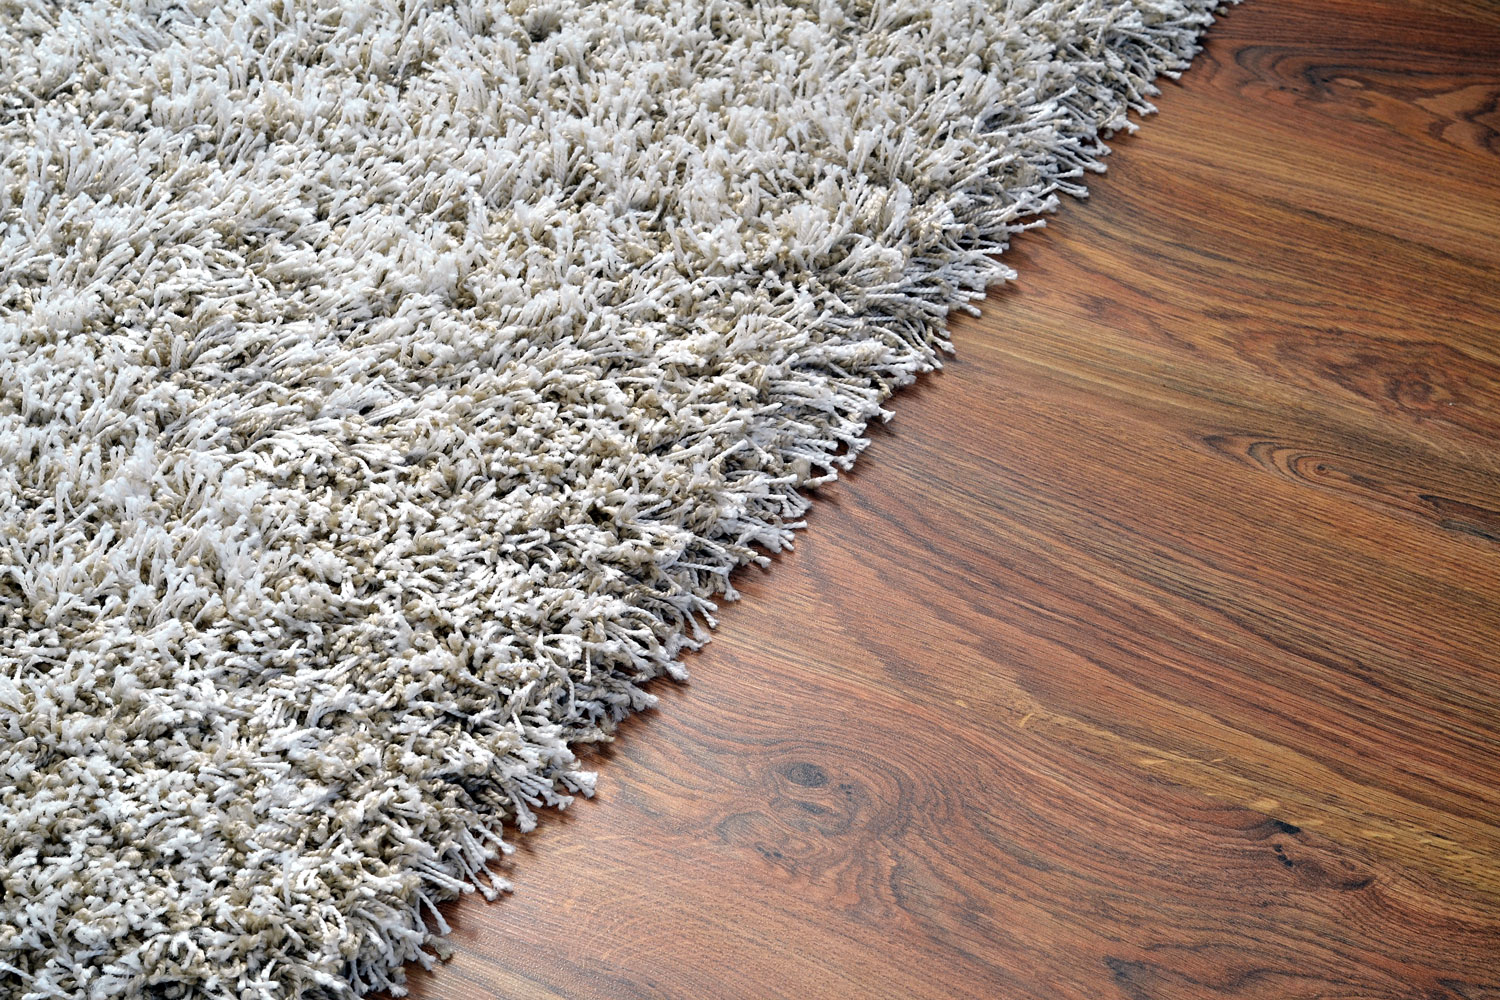 White shaggy carpet on brown wooden floor detail, Laminate Vs Carpet In The Living Room: Which To Choose